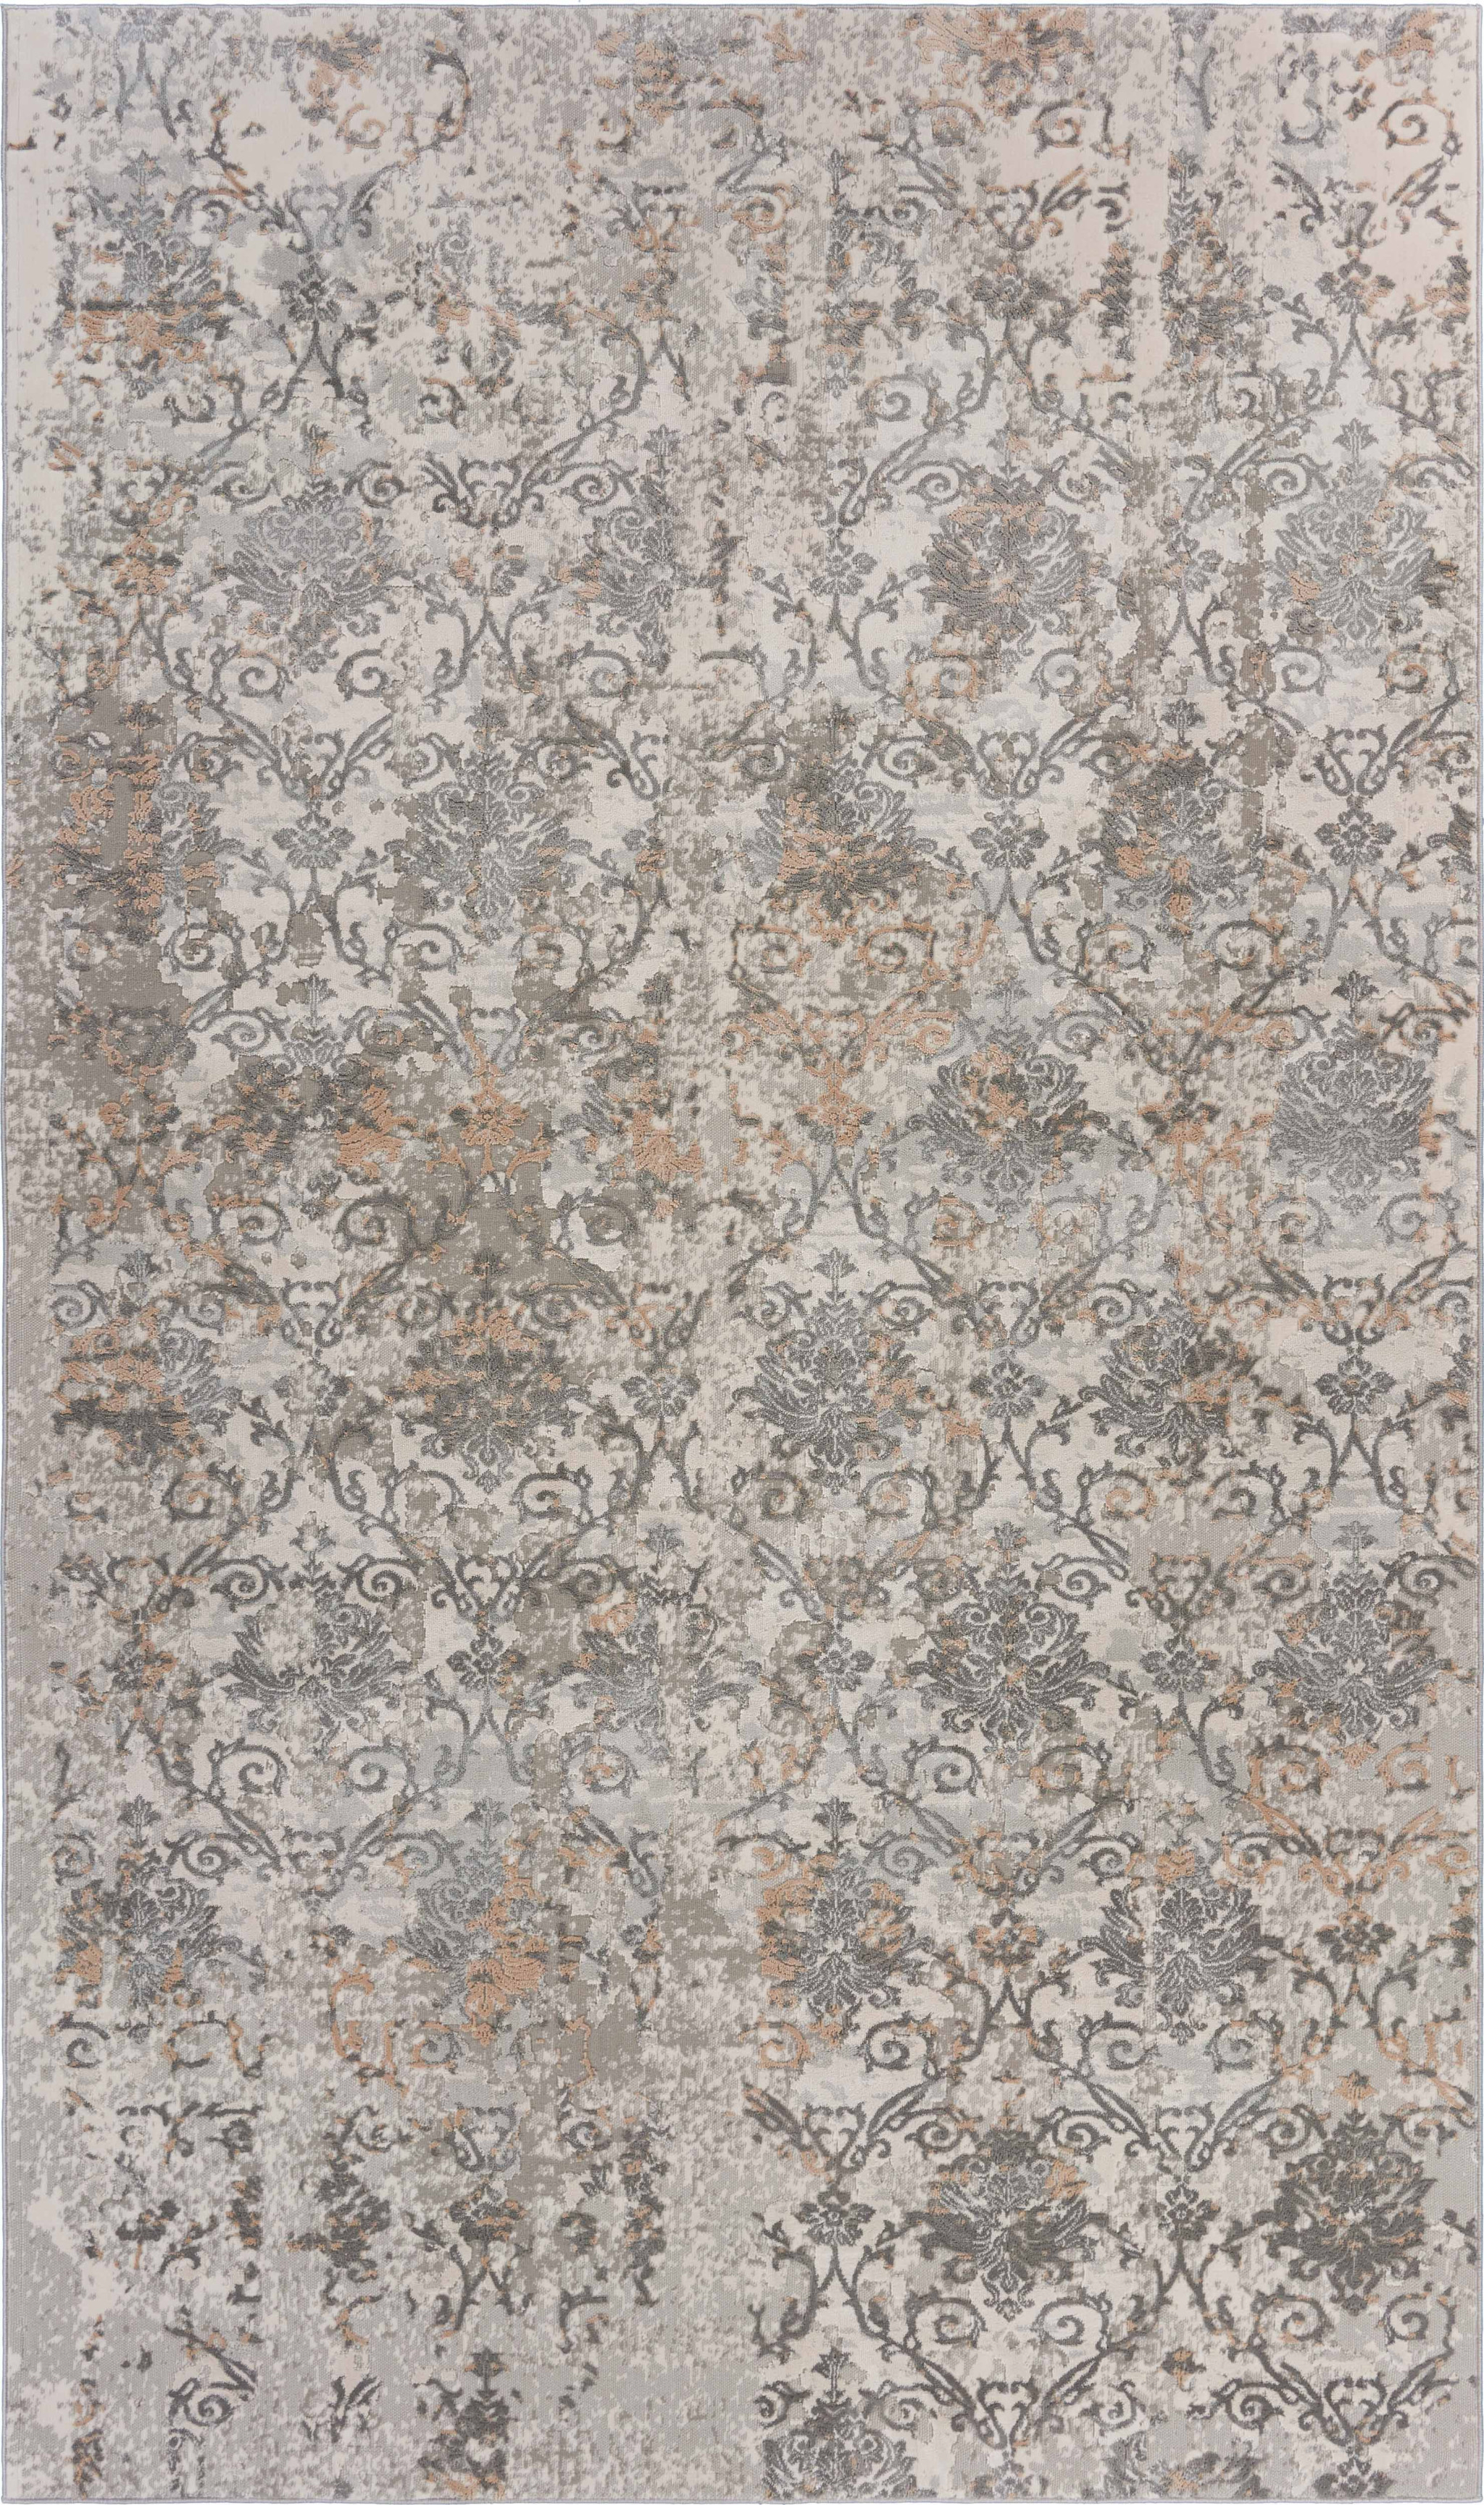 5' X 8' Cream Abstract Distressed Area Rug-515986-1